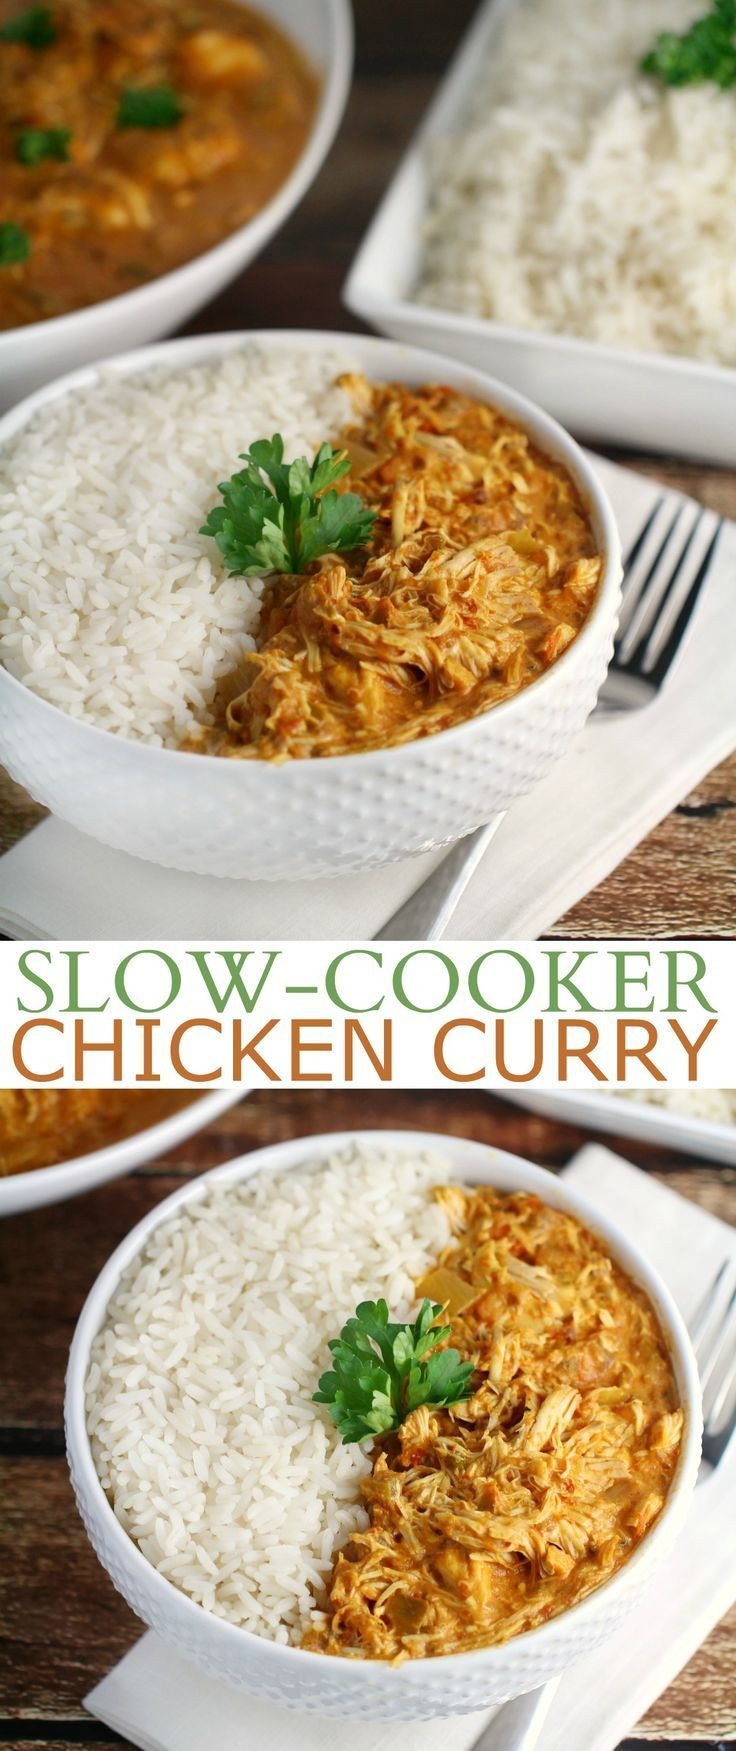 Cheap Healthy Slow Cooker Recipes
 Slow Cooker Chicken Curry Recipe